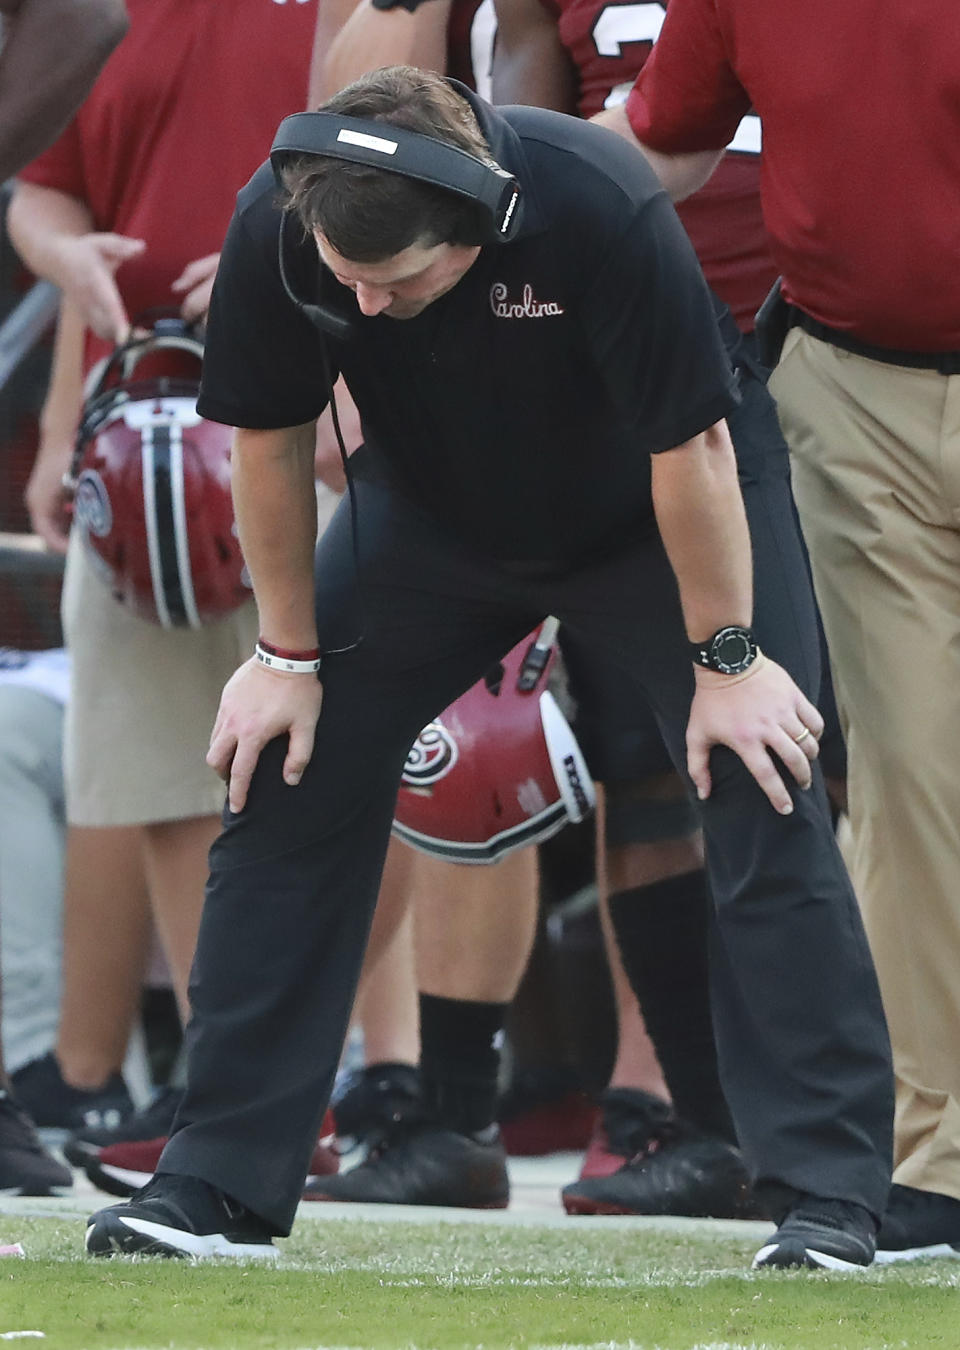 South Carolina coach Will Muschamp reacts on the sidelines during the closing minutes of a 41-17 loss to Georgia in an NCAA college football game Saturday, Sept. 8, 2018, in Columbia, S.C. Georgia defeated South Carolina 41-17.(Curtis Compton/Atlanta Journal-Constitution via AP)